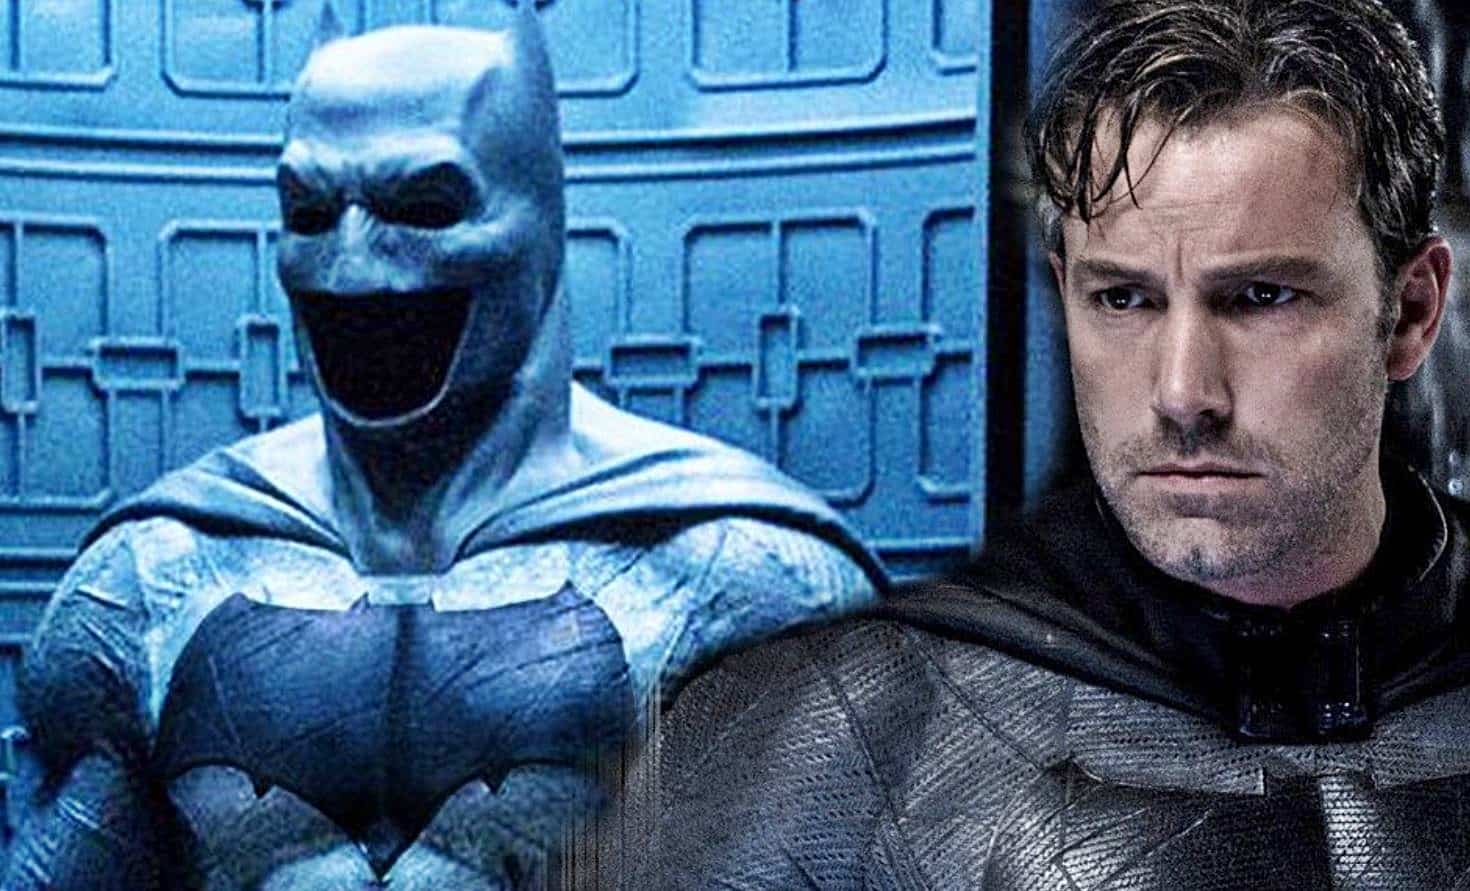 Batman Movie Begins Production In November - Likely Without Ben Affleck